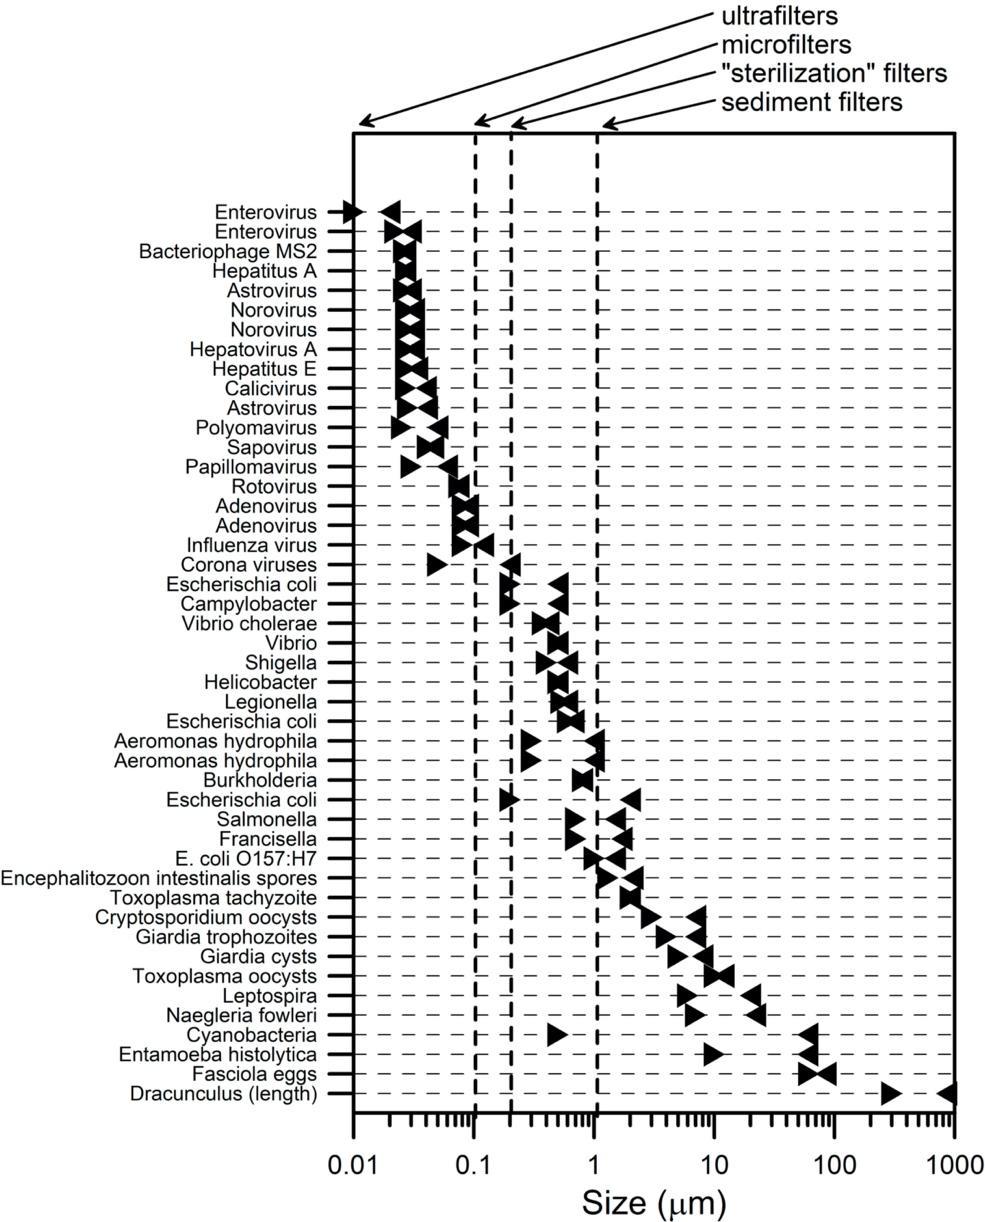 Chart showing sizes of various waterborne pathogens